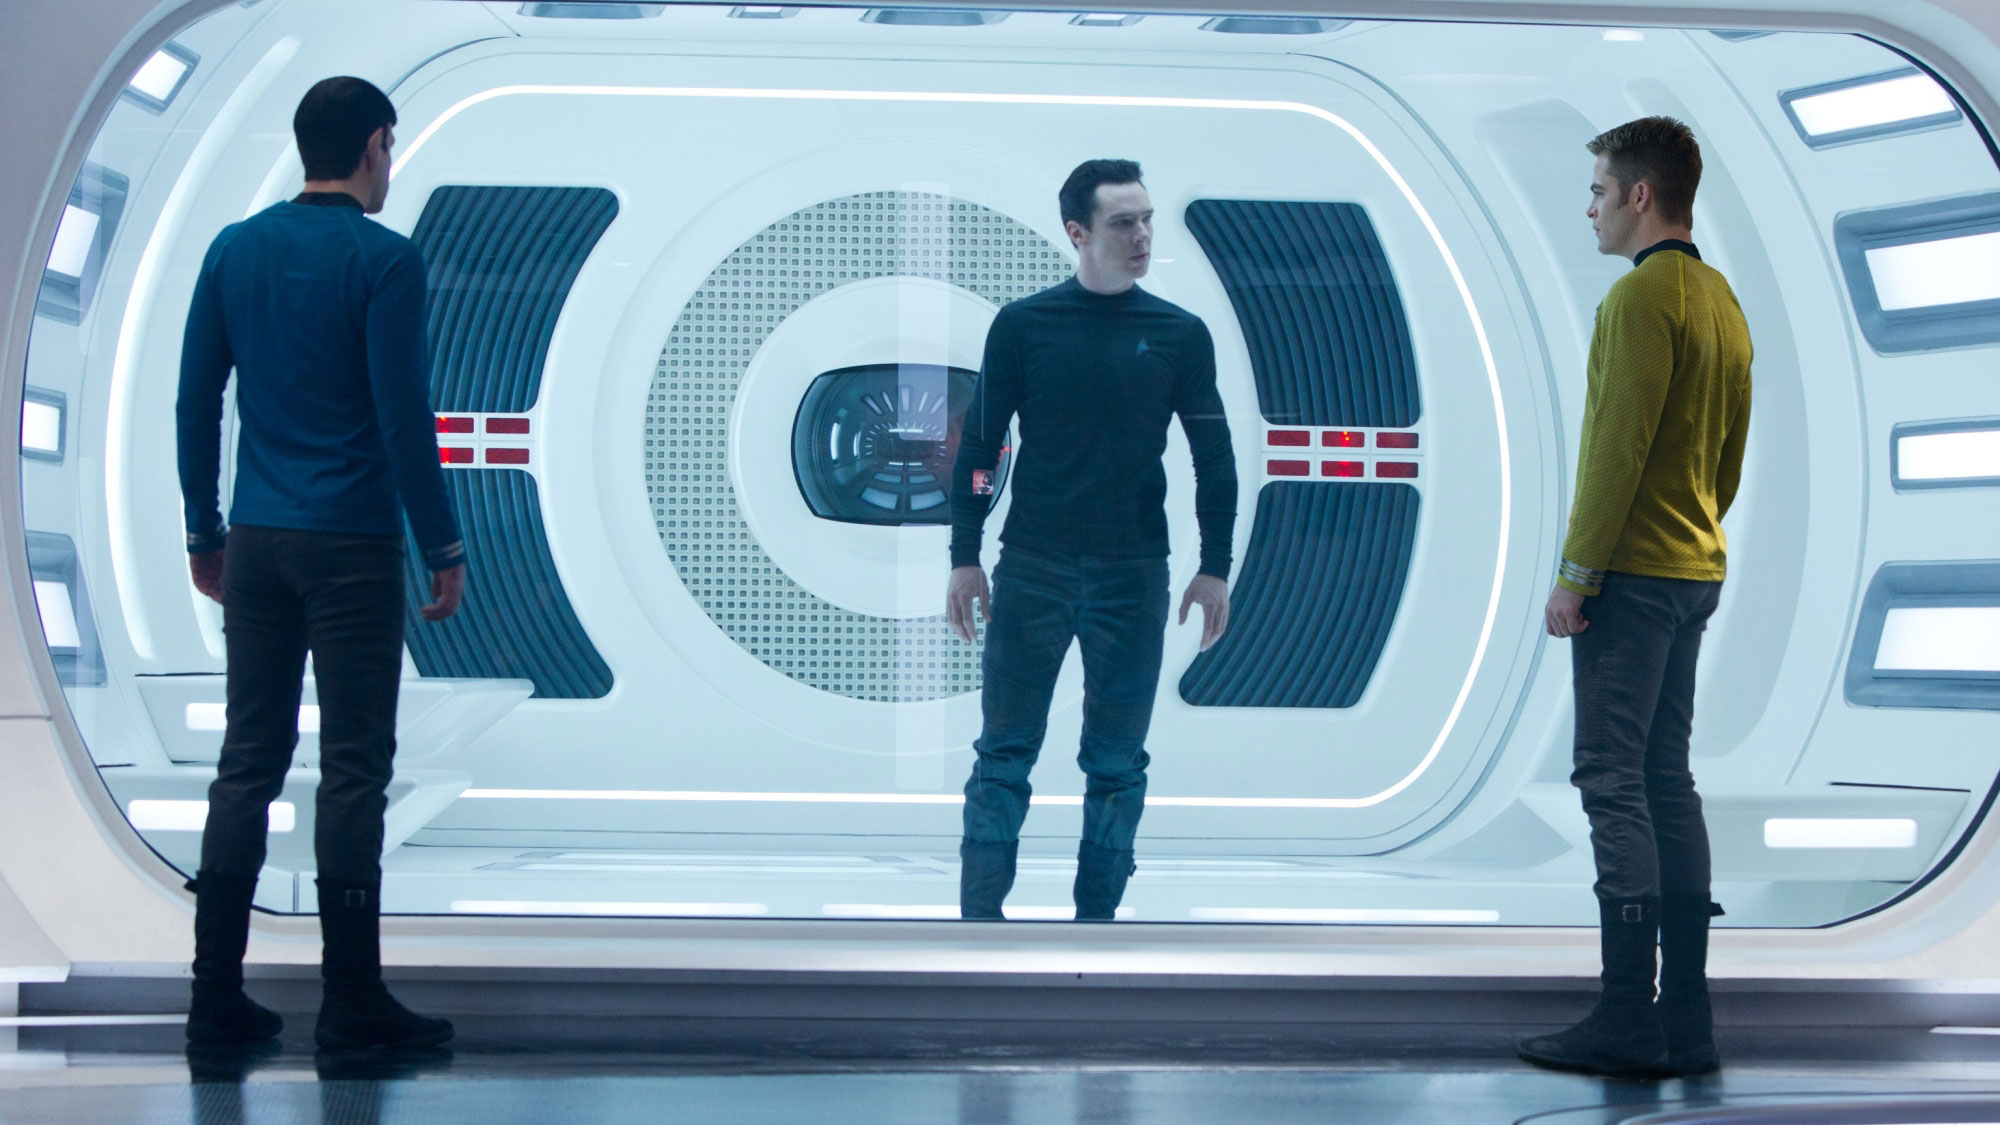 shielding your eyes from the glaring lights of star trek into darkness 005